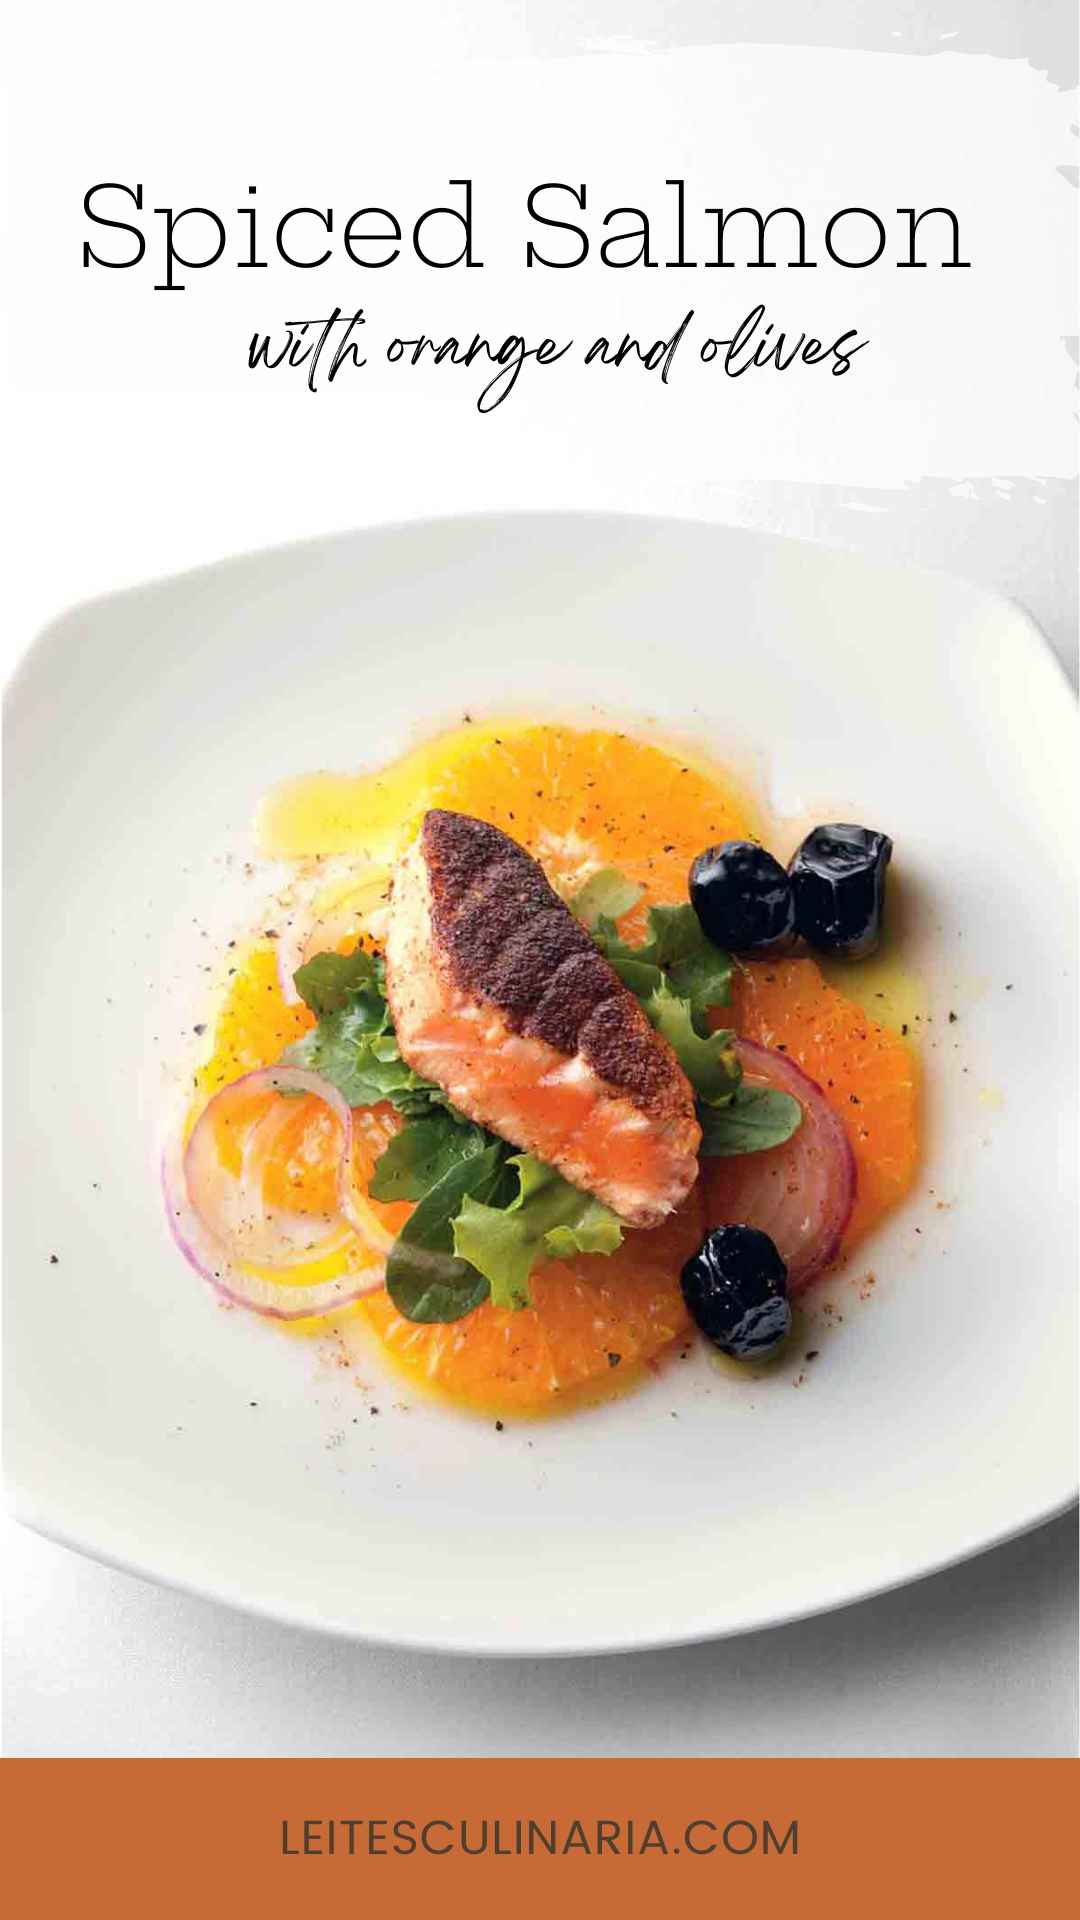 A piece of crispy salmon on top of sliced oranges, lettuce, black olives, and thinly sliced red onion on a white plate.